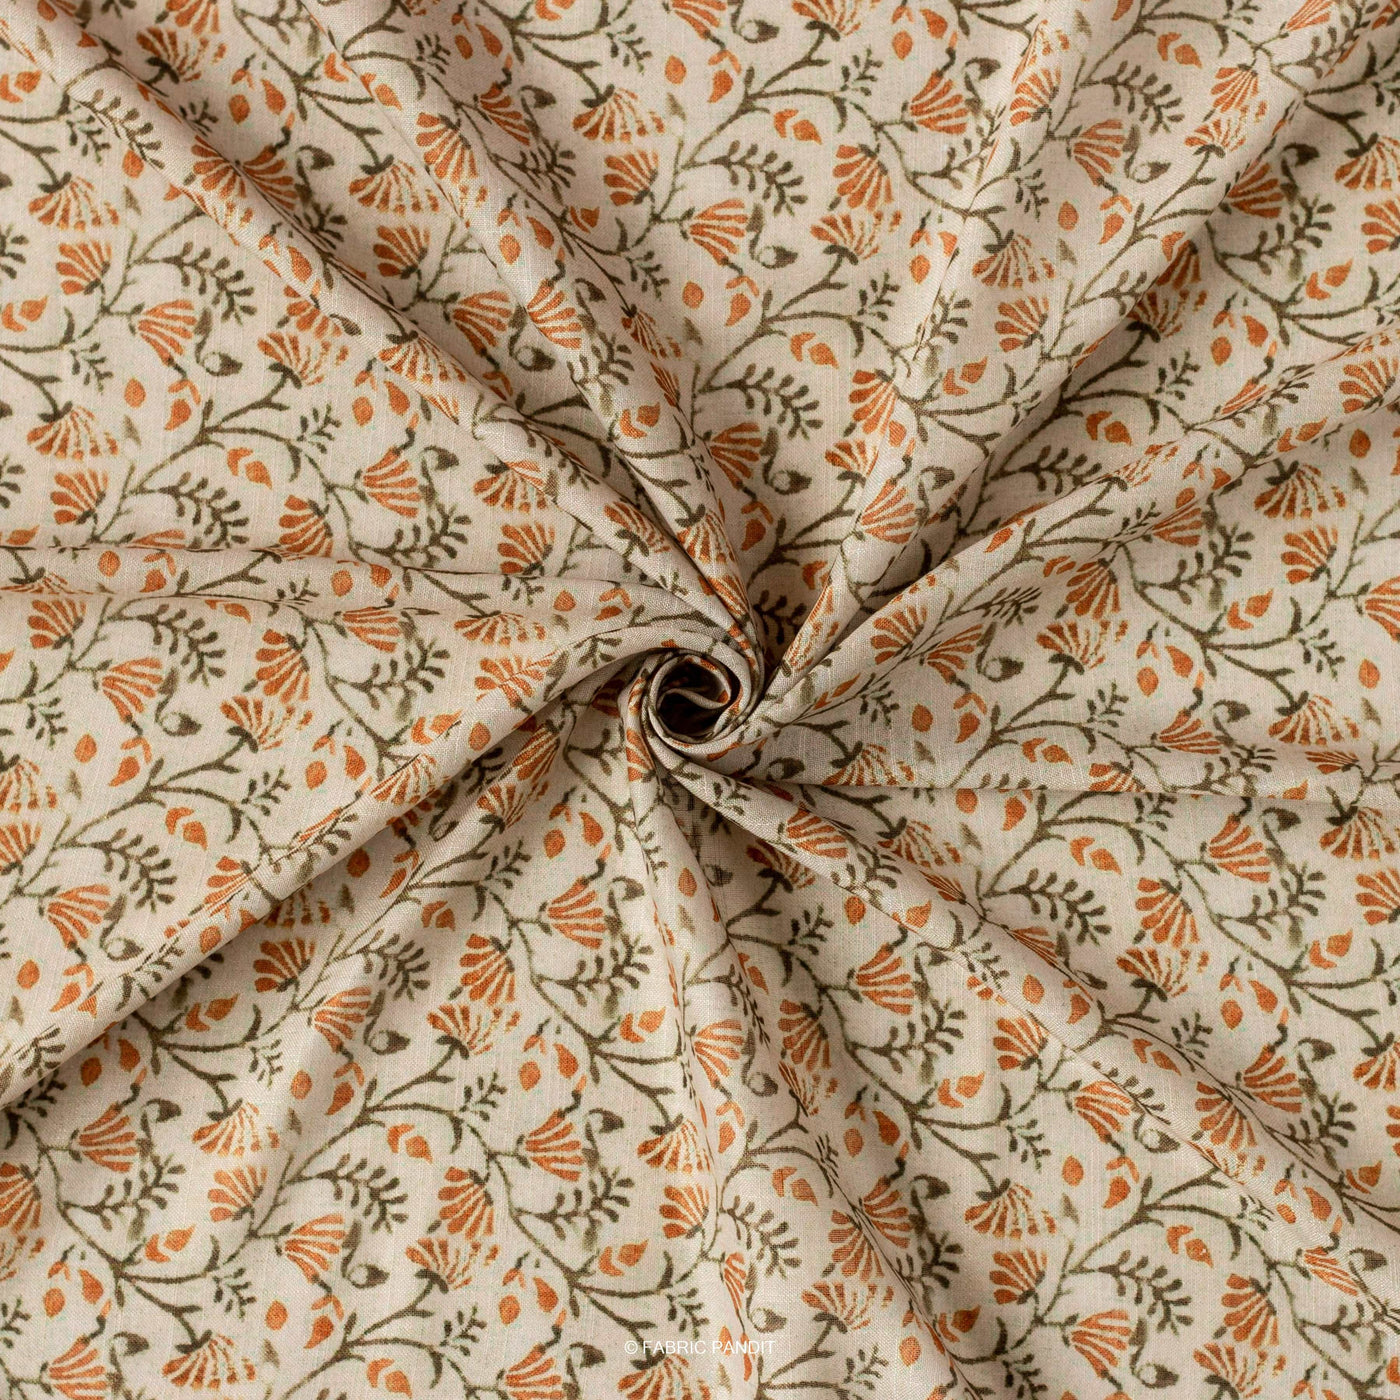 Fabric Pandit Fabric Orange And Khaki Continuous Floral Pattern Digital Printed Poly Linen Fabric (Width 44 Inches)